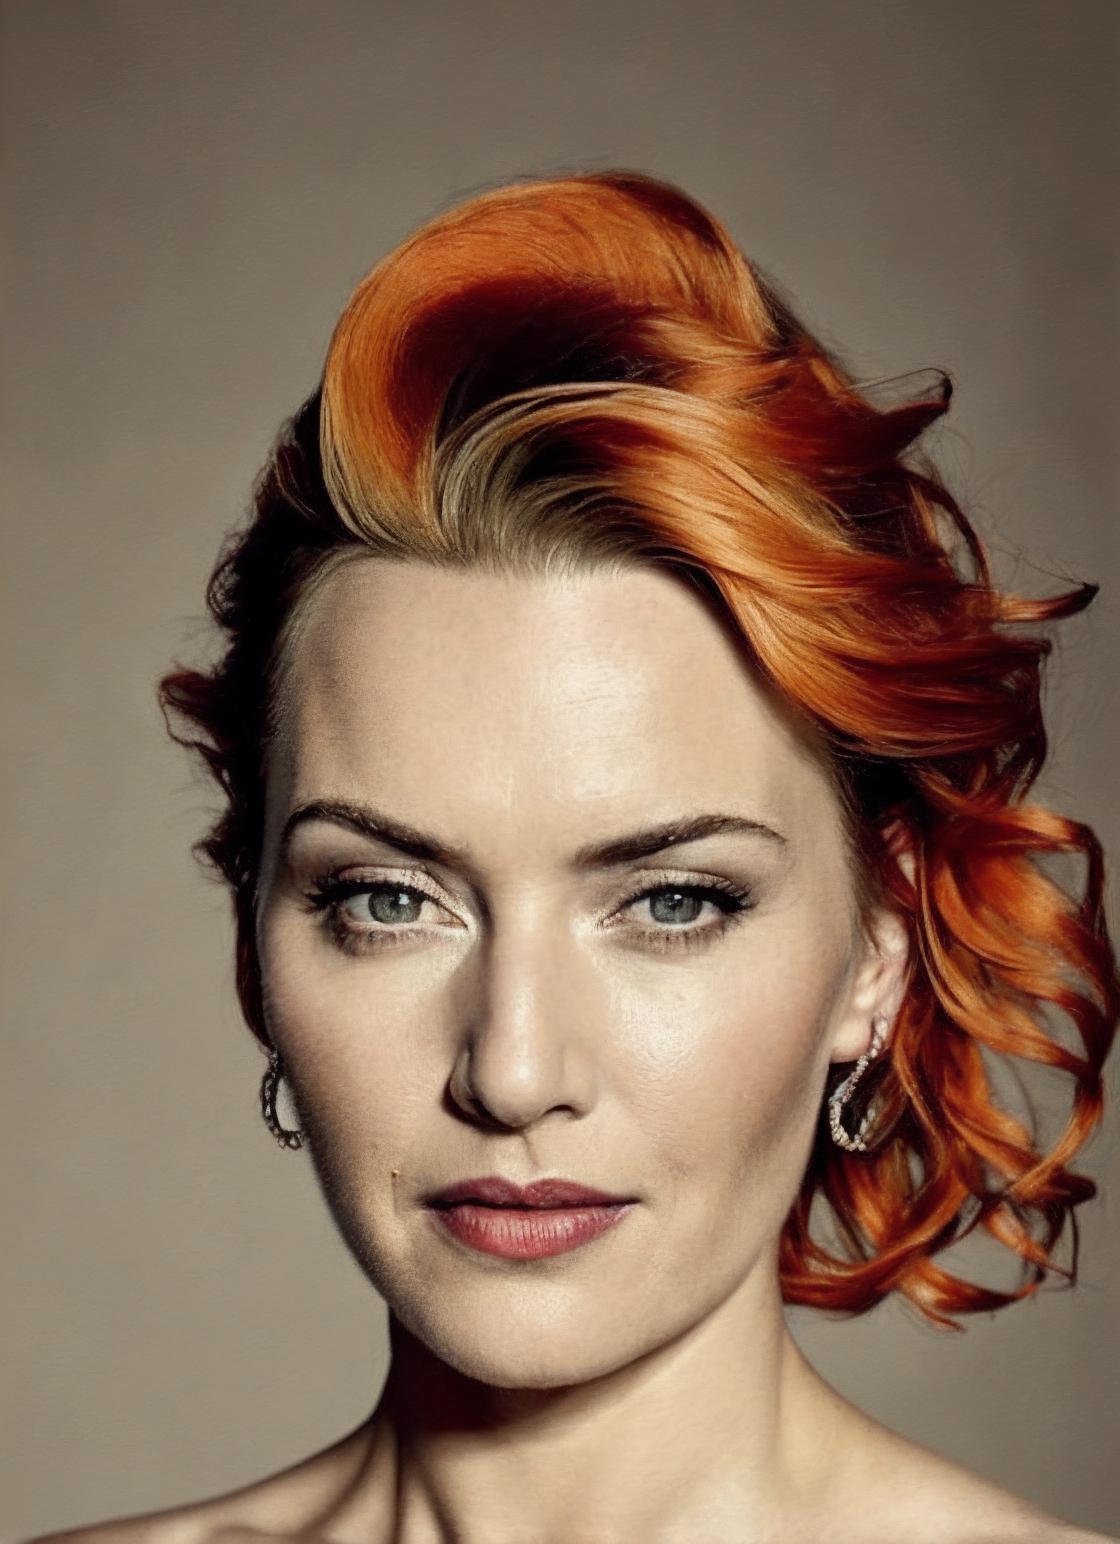 Kate Winslet's Beauty Evolution From the '90s to Today